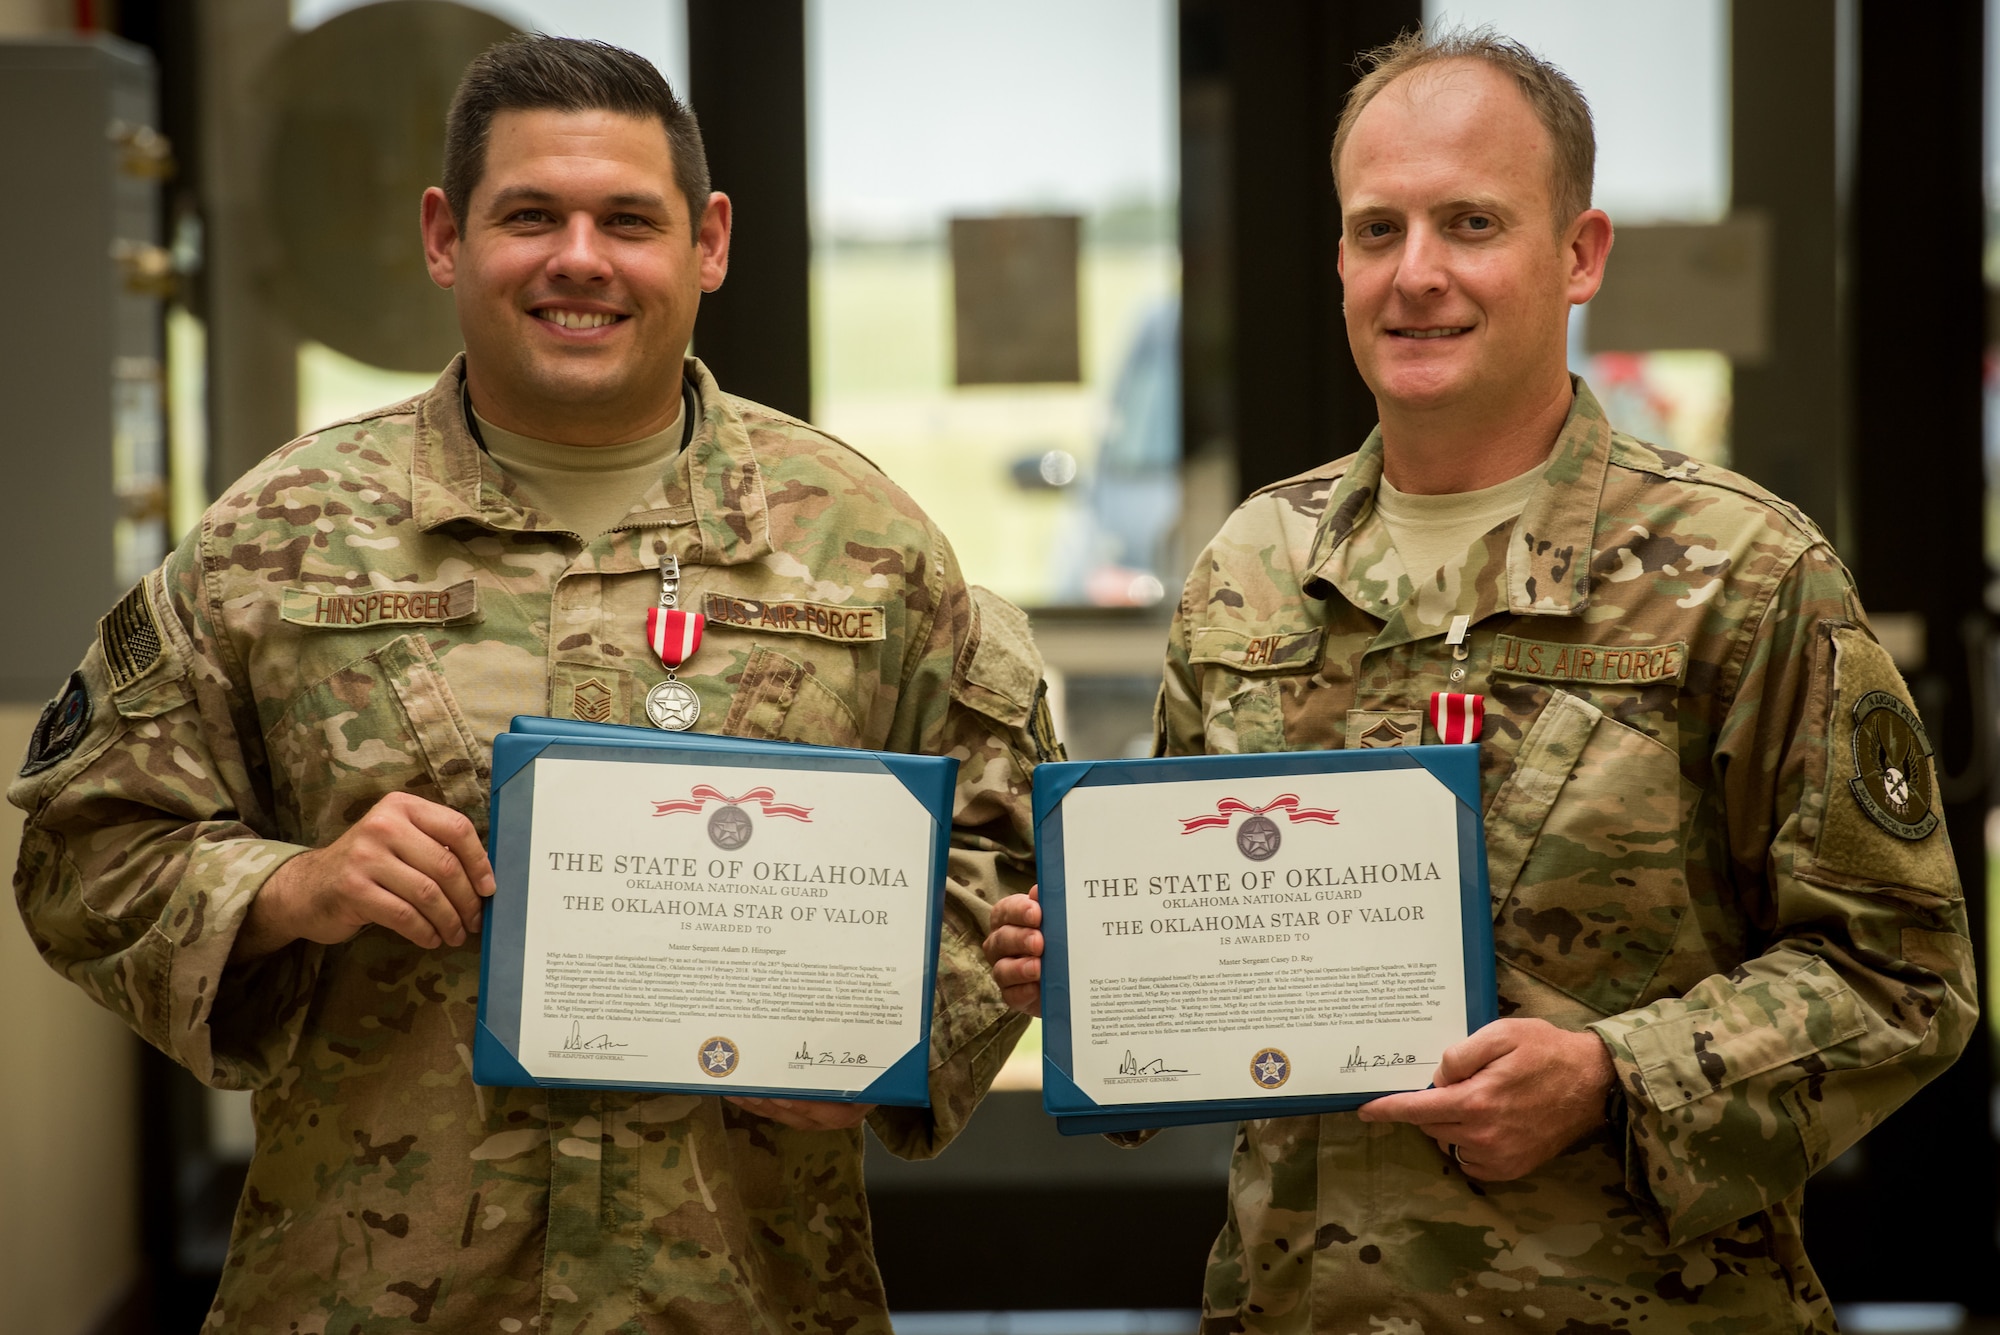 Master Sgt. Adam Hinsperger (left), 285th Special Operations Intelligence Squadron (SOIS) intelligence analyst, and Master Sgt. Casey Ray (middle), 285th SOIS intelligence analyst, pose with their Star of Valor awards Aug. 4, 2018, at Will Rogers Air National Guard Base, Oklahoma City.